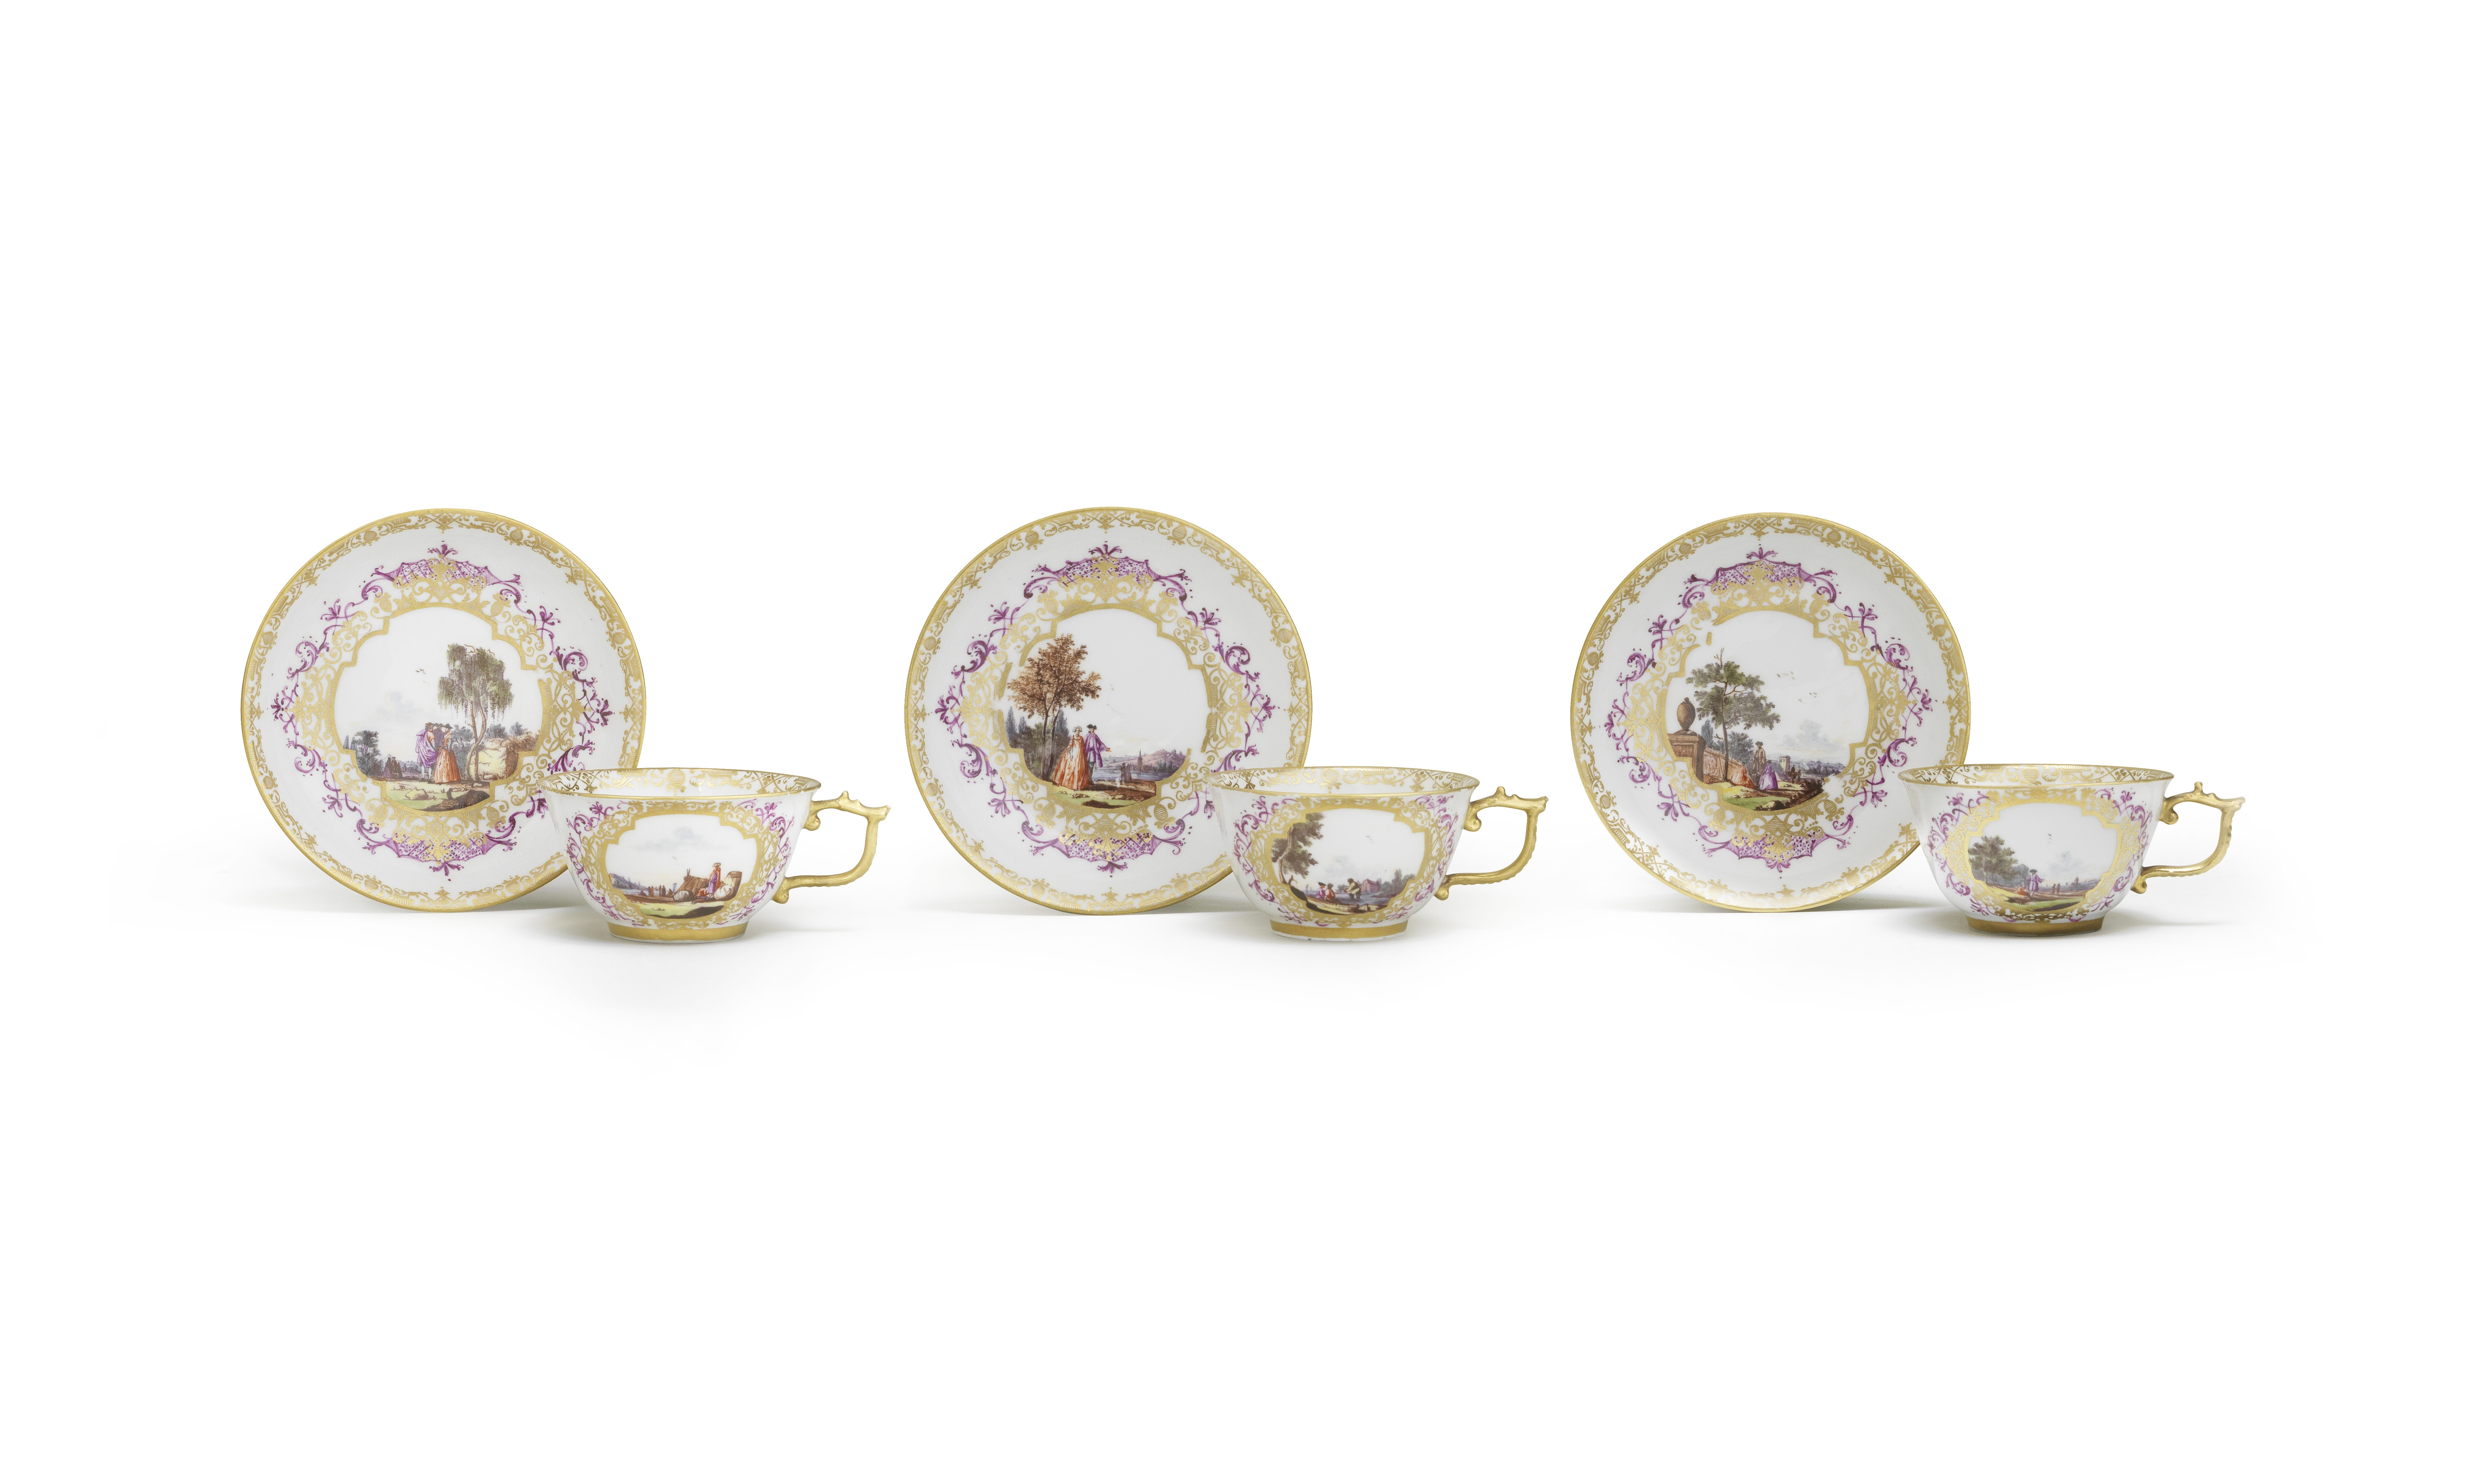 Three Meissen teacups and saucers, mid 18th century